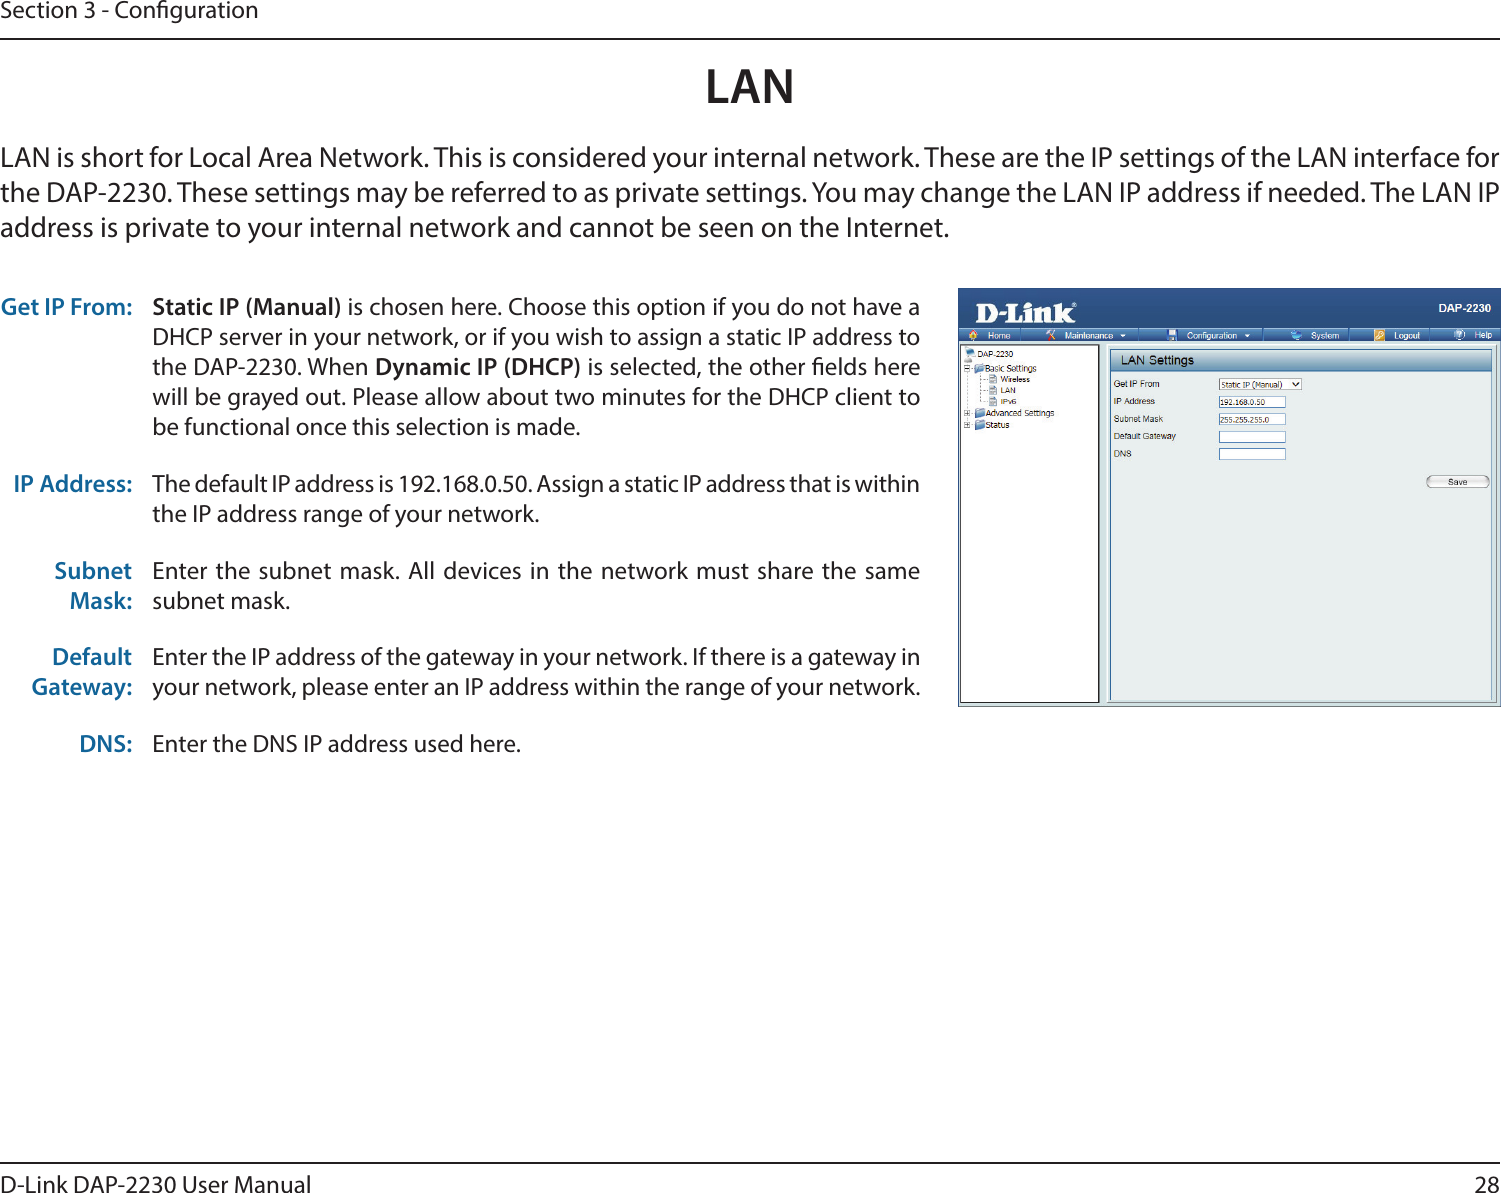 28D-Link DAP-2230 User ManualSection 3 - CongurationLAN LAN is short for Local Area Network. This is considered your internal network. These are the IP settings of the LAN interface for the DAP-2230. These settings may be referred to as private settings. You may change the LAN IP address if needed. The LAN IP address is private to your internal network and cannot be seen on the Internet.Get IP From: Static IP (Manual) is chosen here. Choose this option if you do not have a DHCP server in your network, or if you wish to assign a static IP address to the DAP-2230. When Dynamic IP (DHCP) is selected, the other elds here will be grayed out. Please allow about two minutes for the DHCP client to be functional once this selection is made. IP Address: The default IP address is 192.168.0.50. Assign a static IP address that is within the IP address range of your network.Subnet Mask:Enter the subnet mask. All devices in the network must share the same subnet mask.Default Gateway:Enter the IP address of the gateway in your network. If there is a gateway in your network, please enter an IP address within the range of your network.DNS: Enter the DNS IP address used here.